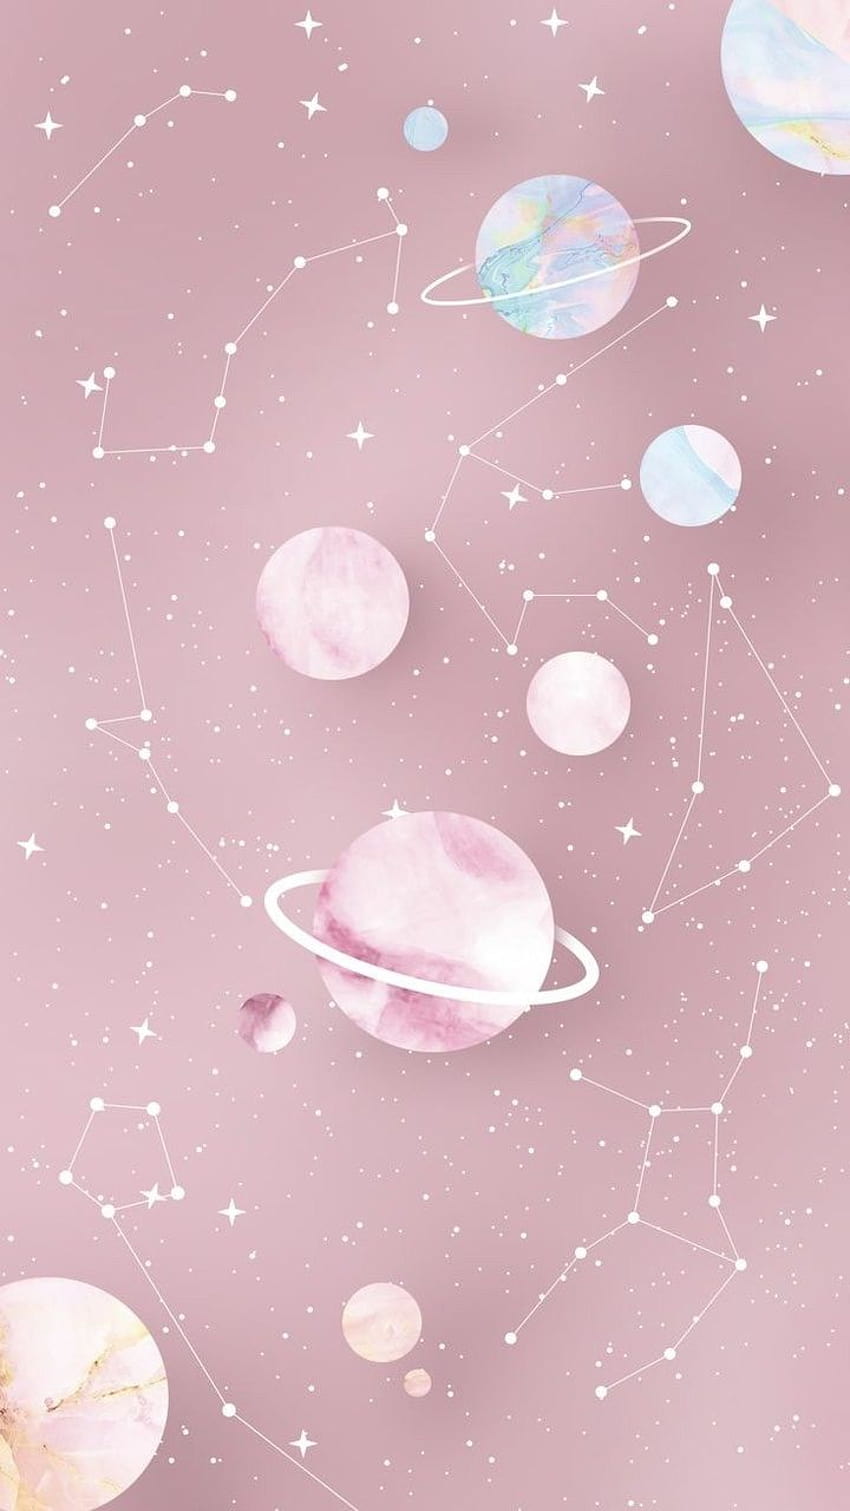 A pink background with planets and stars - Planet, constellation